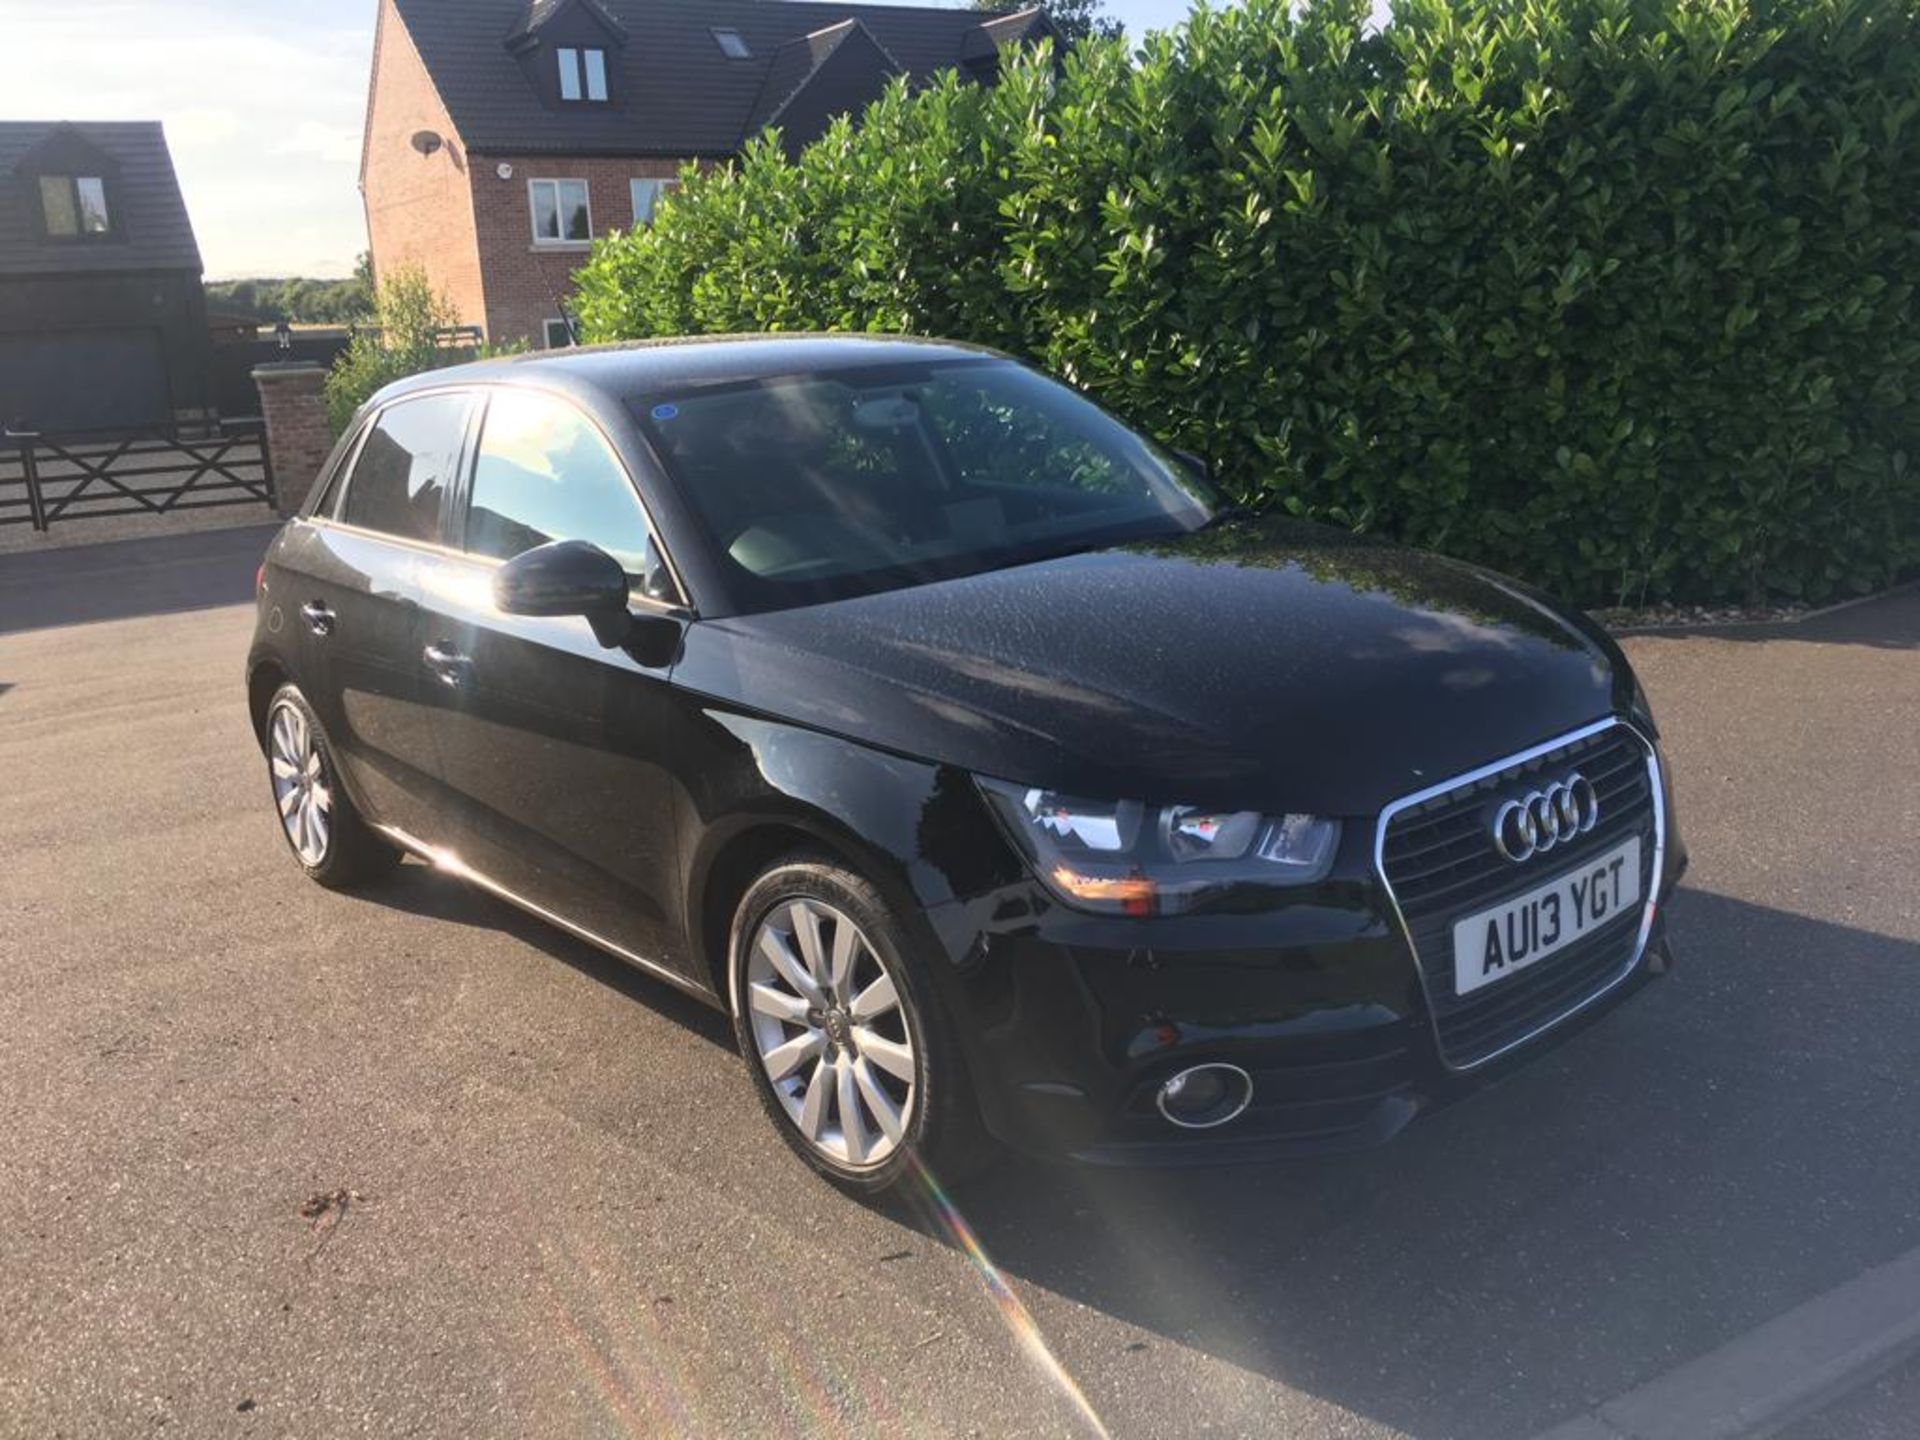 2013 AUDI A1 SPORTBACK SPORT 1.6 TDI 4 DOOR **ONE OWNER FROM NEW**